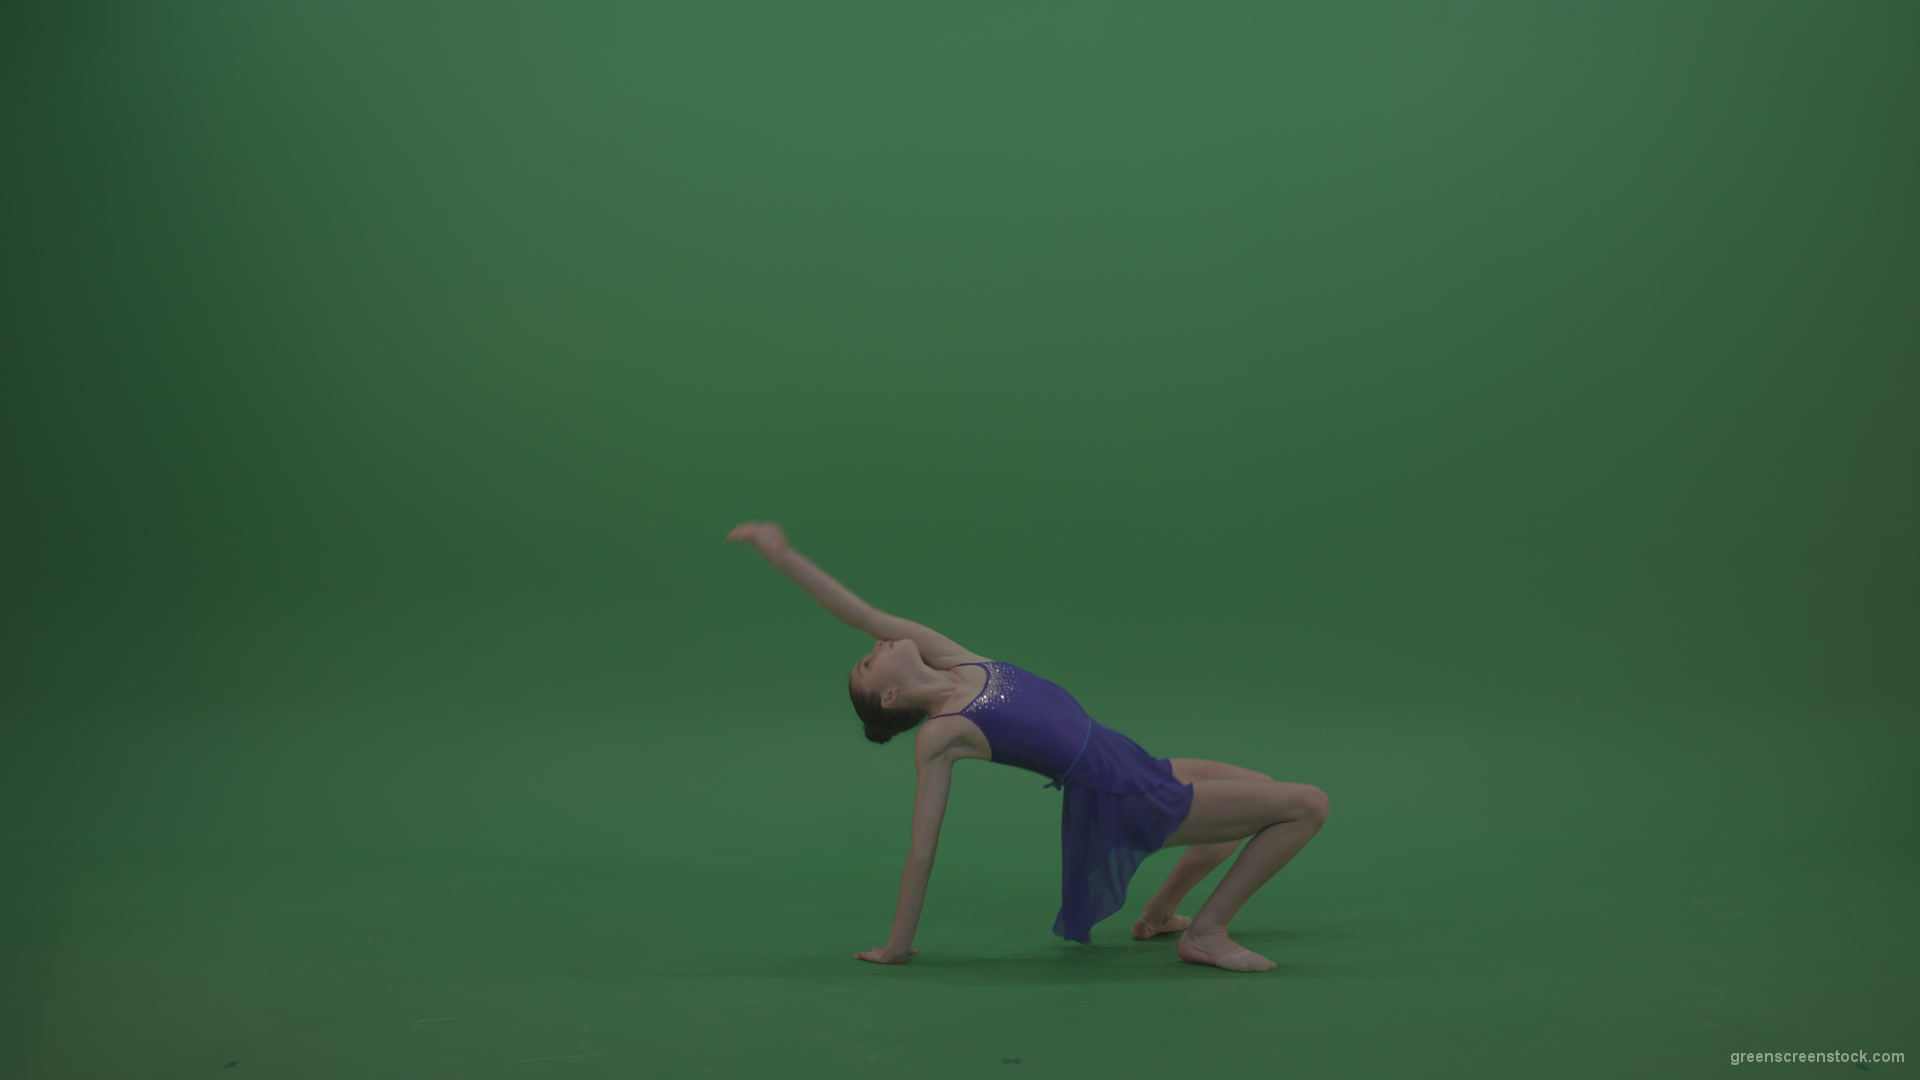 Cute_Athletic_Gymnast_Performing_Awesome_Split_Technique_Spin_Combination_With_Back_Handspring_On_Green_Screen_Chroma_Key_Wall_Background_007 Green Screen Stock